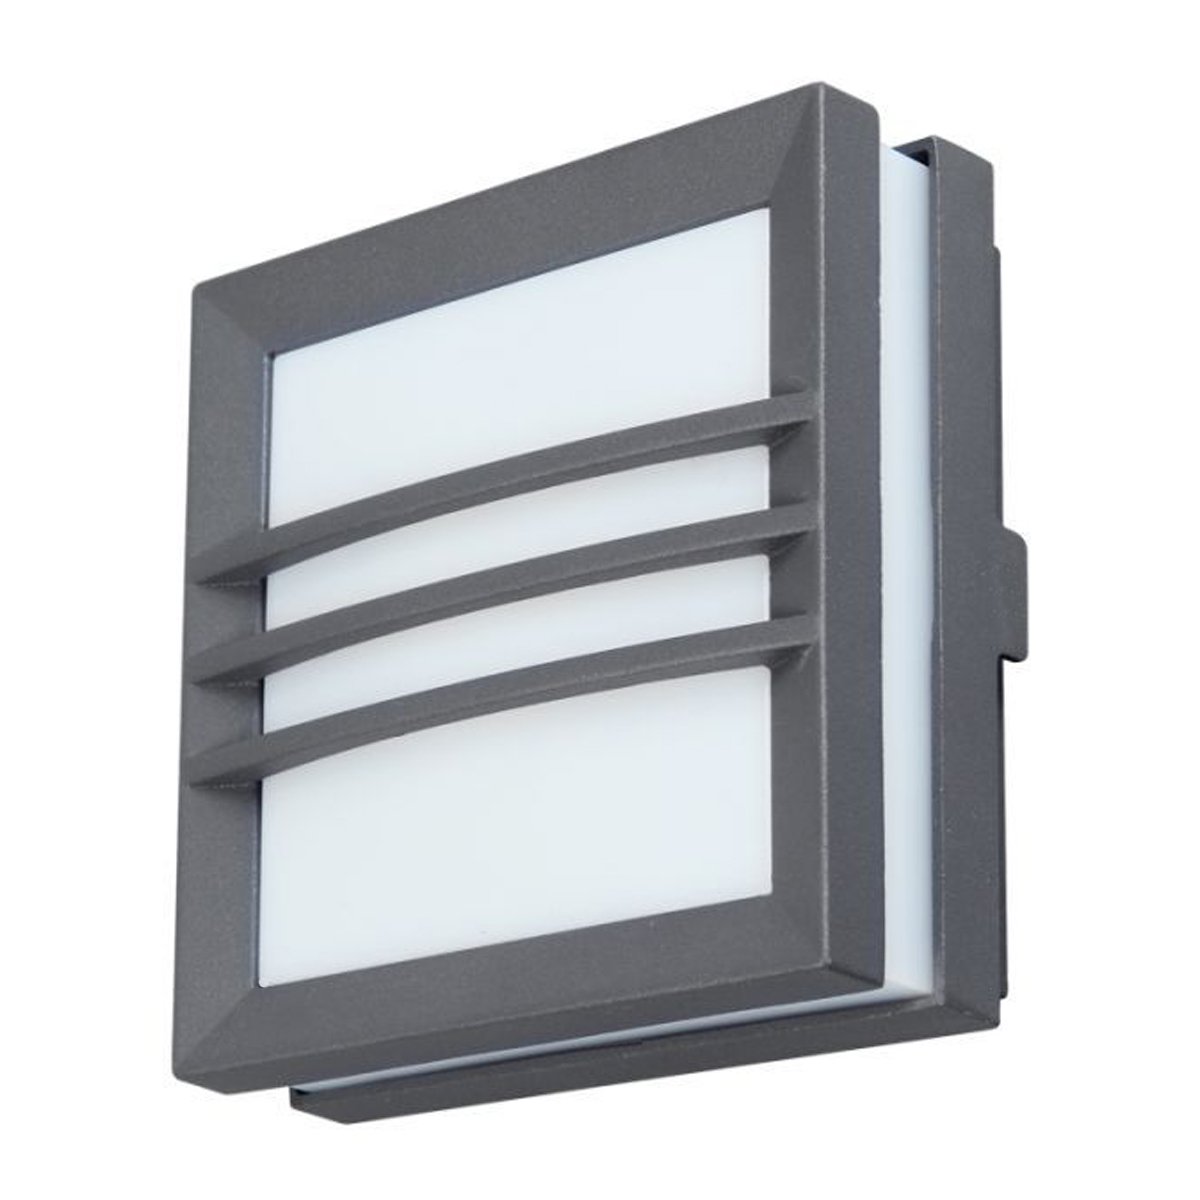 CGC SALLY Dark Grey Cage Square LED Outdoor Wall Light